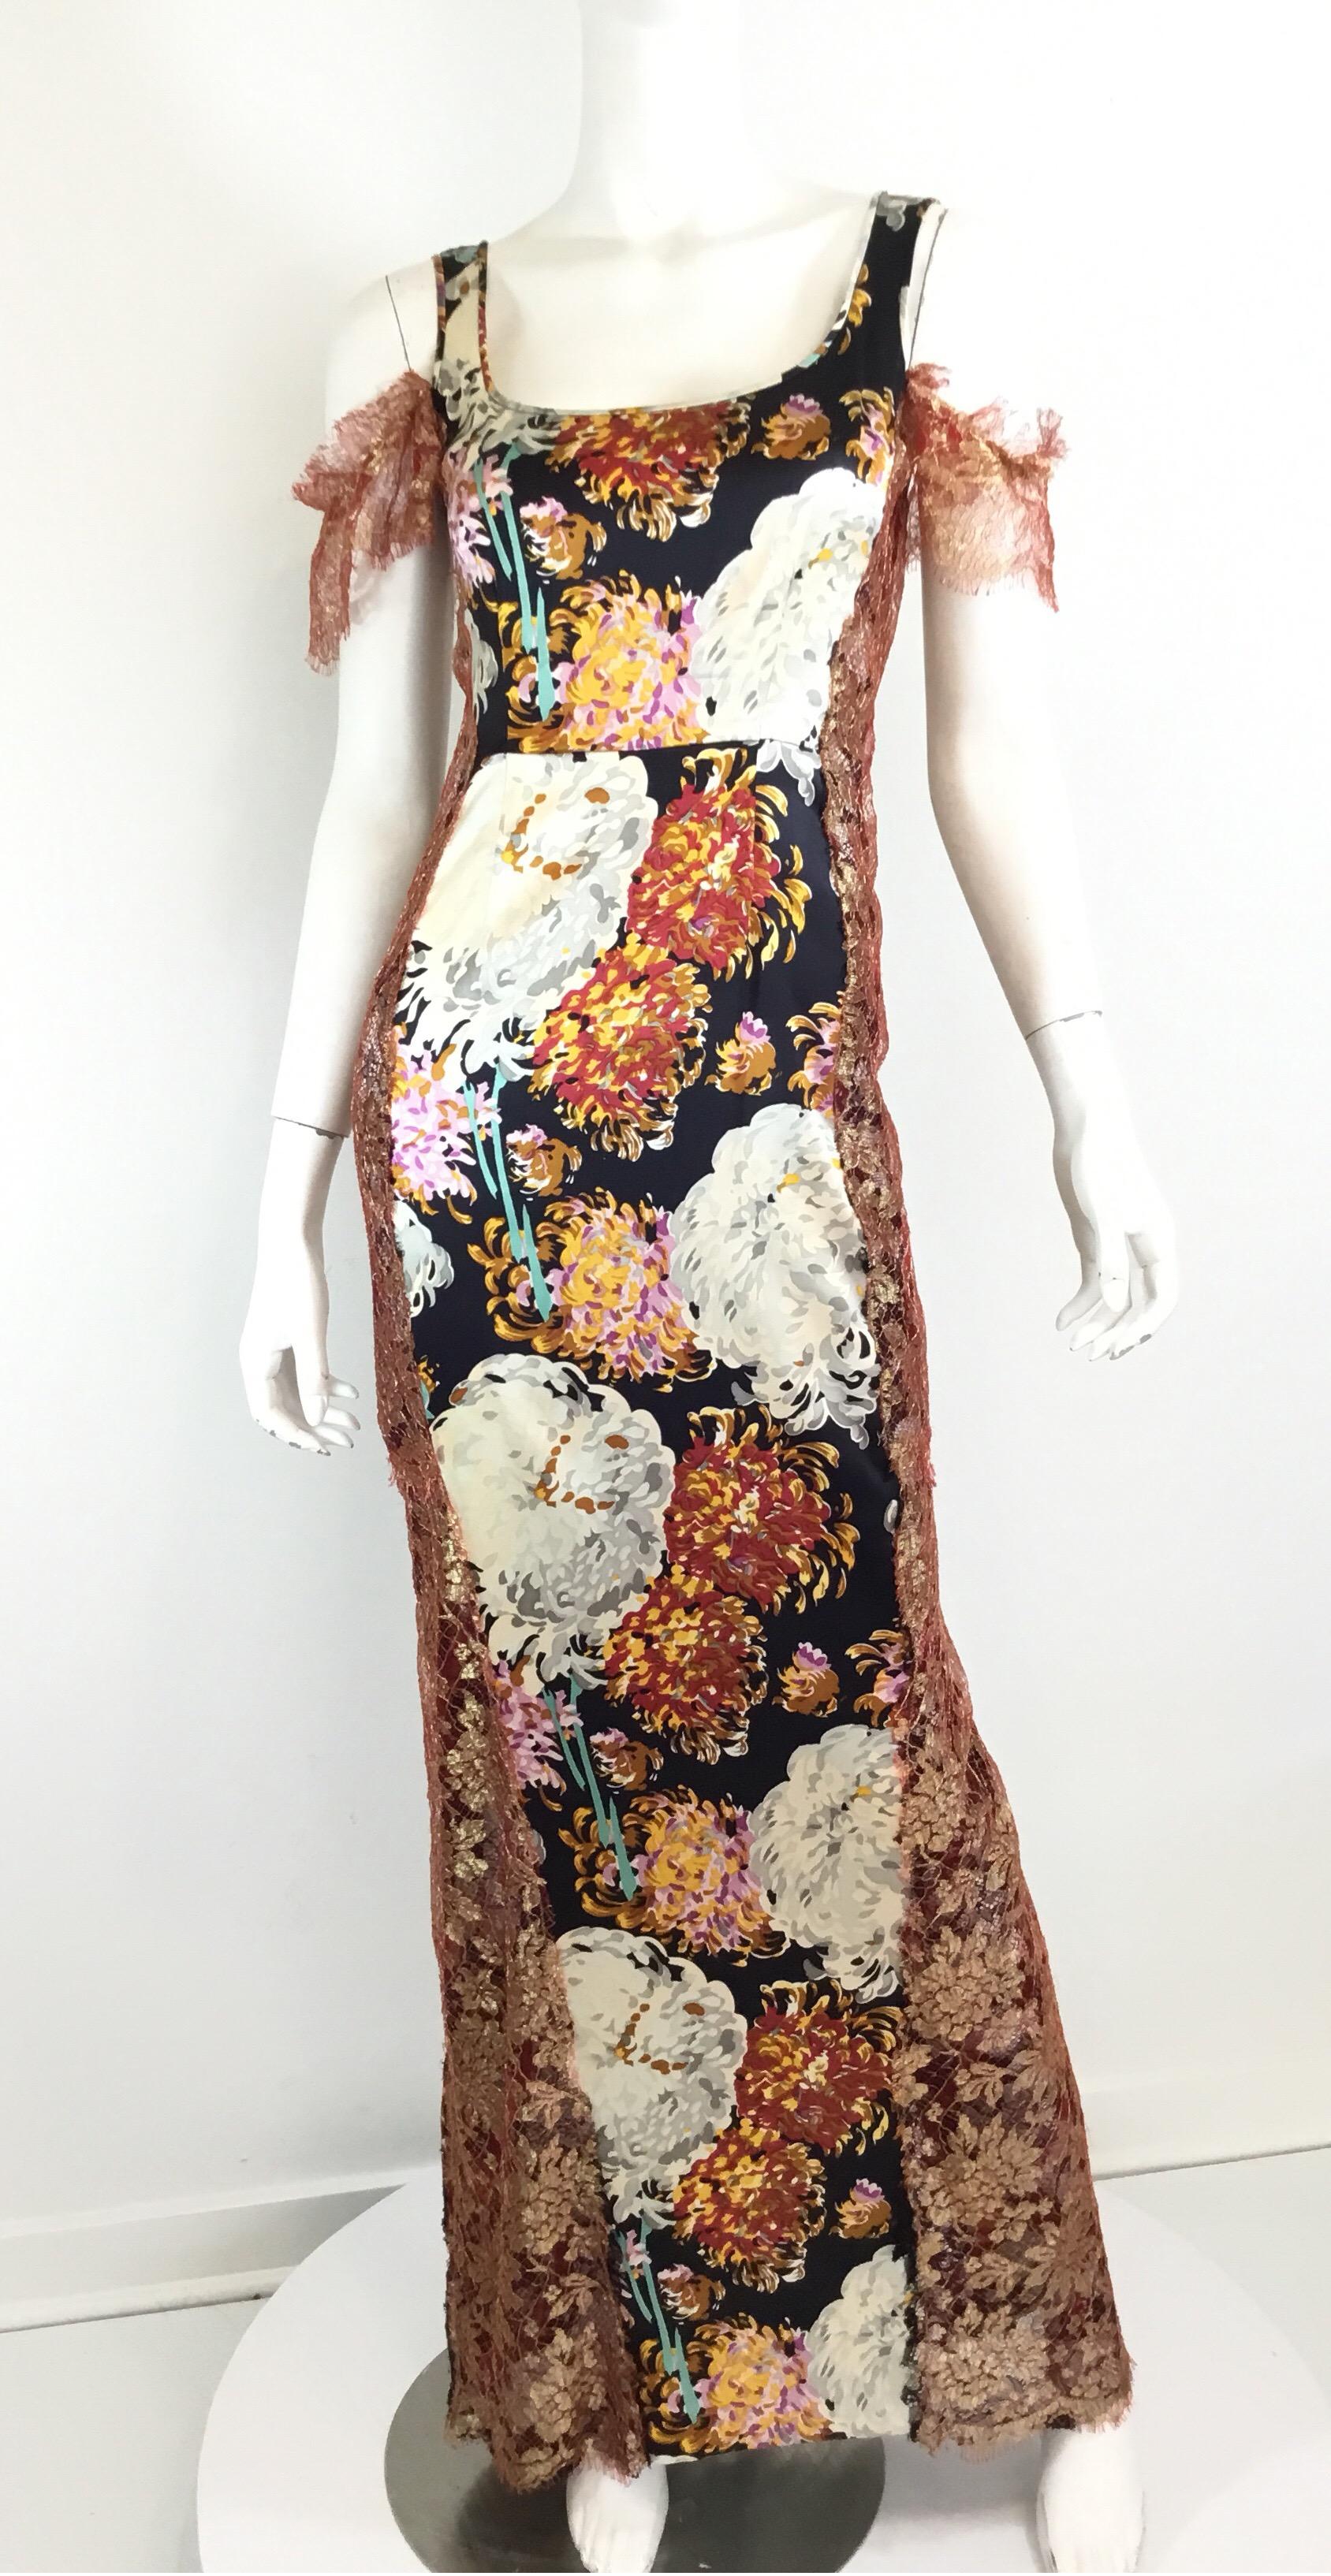 Beautiful Dolce & Gabbana Dress, circa 1990’s. Dress features a floral print on a silk-blend fabric with a cold-shoulder style, red and metallic gold lace sleeves and side panel. Black lace fishtail hem at the back and a back zipper fastening. Size